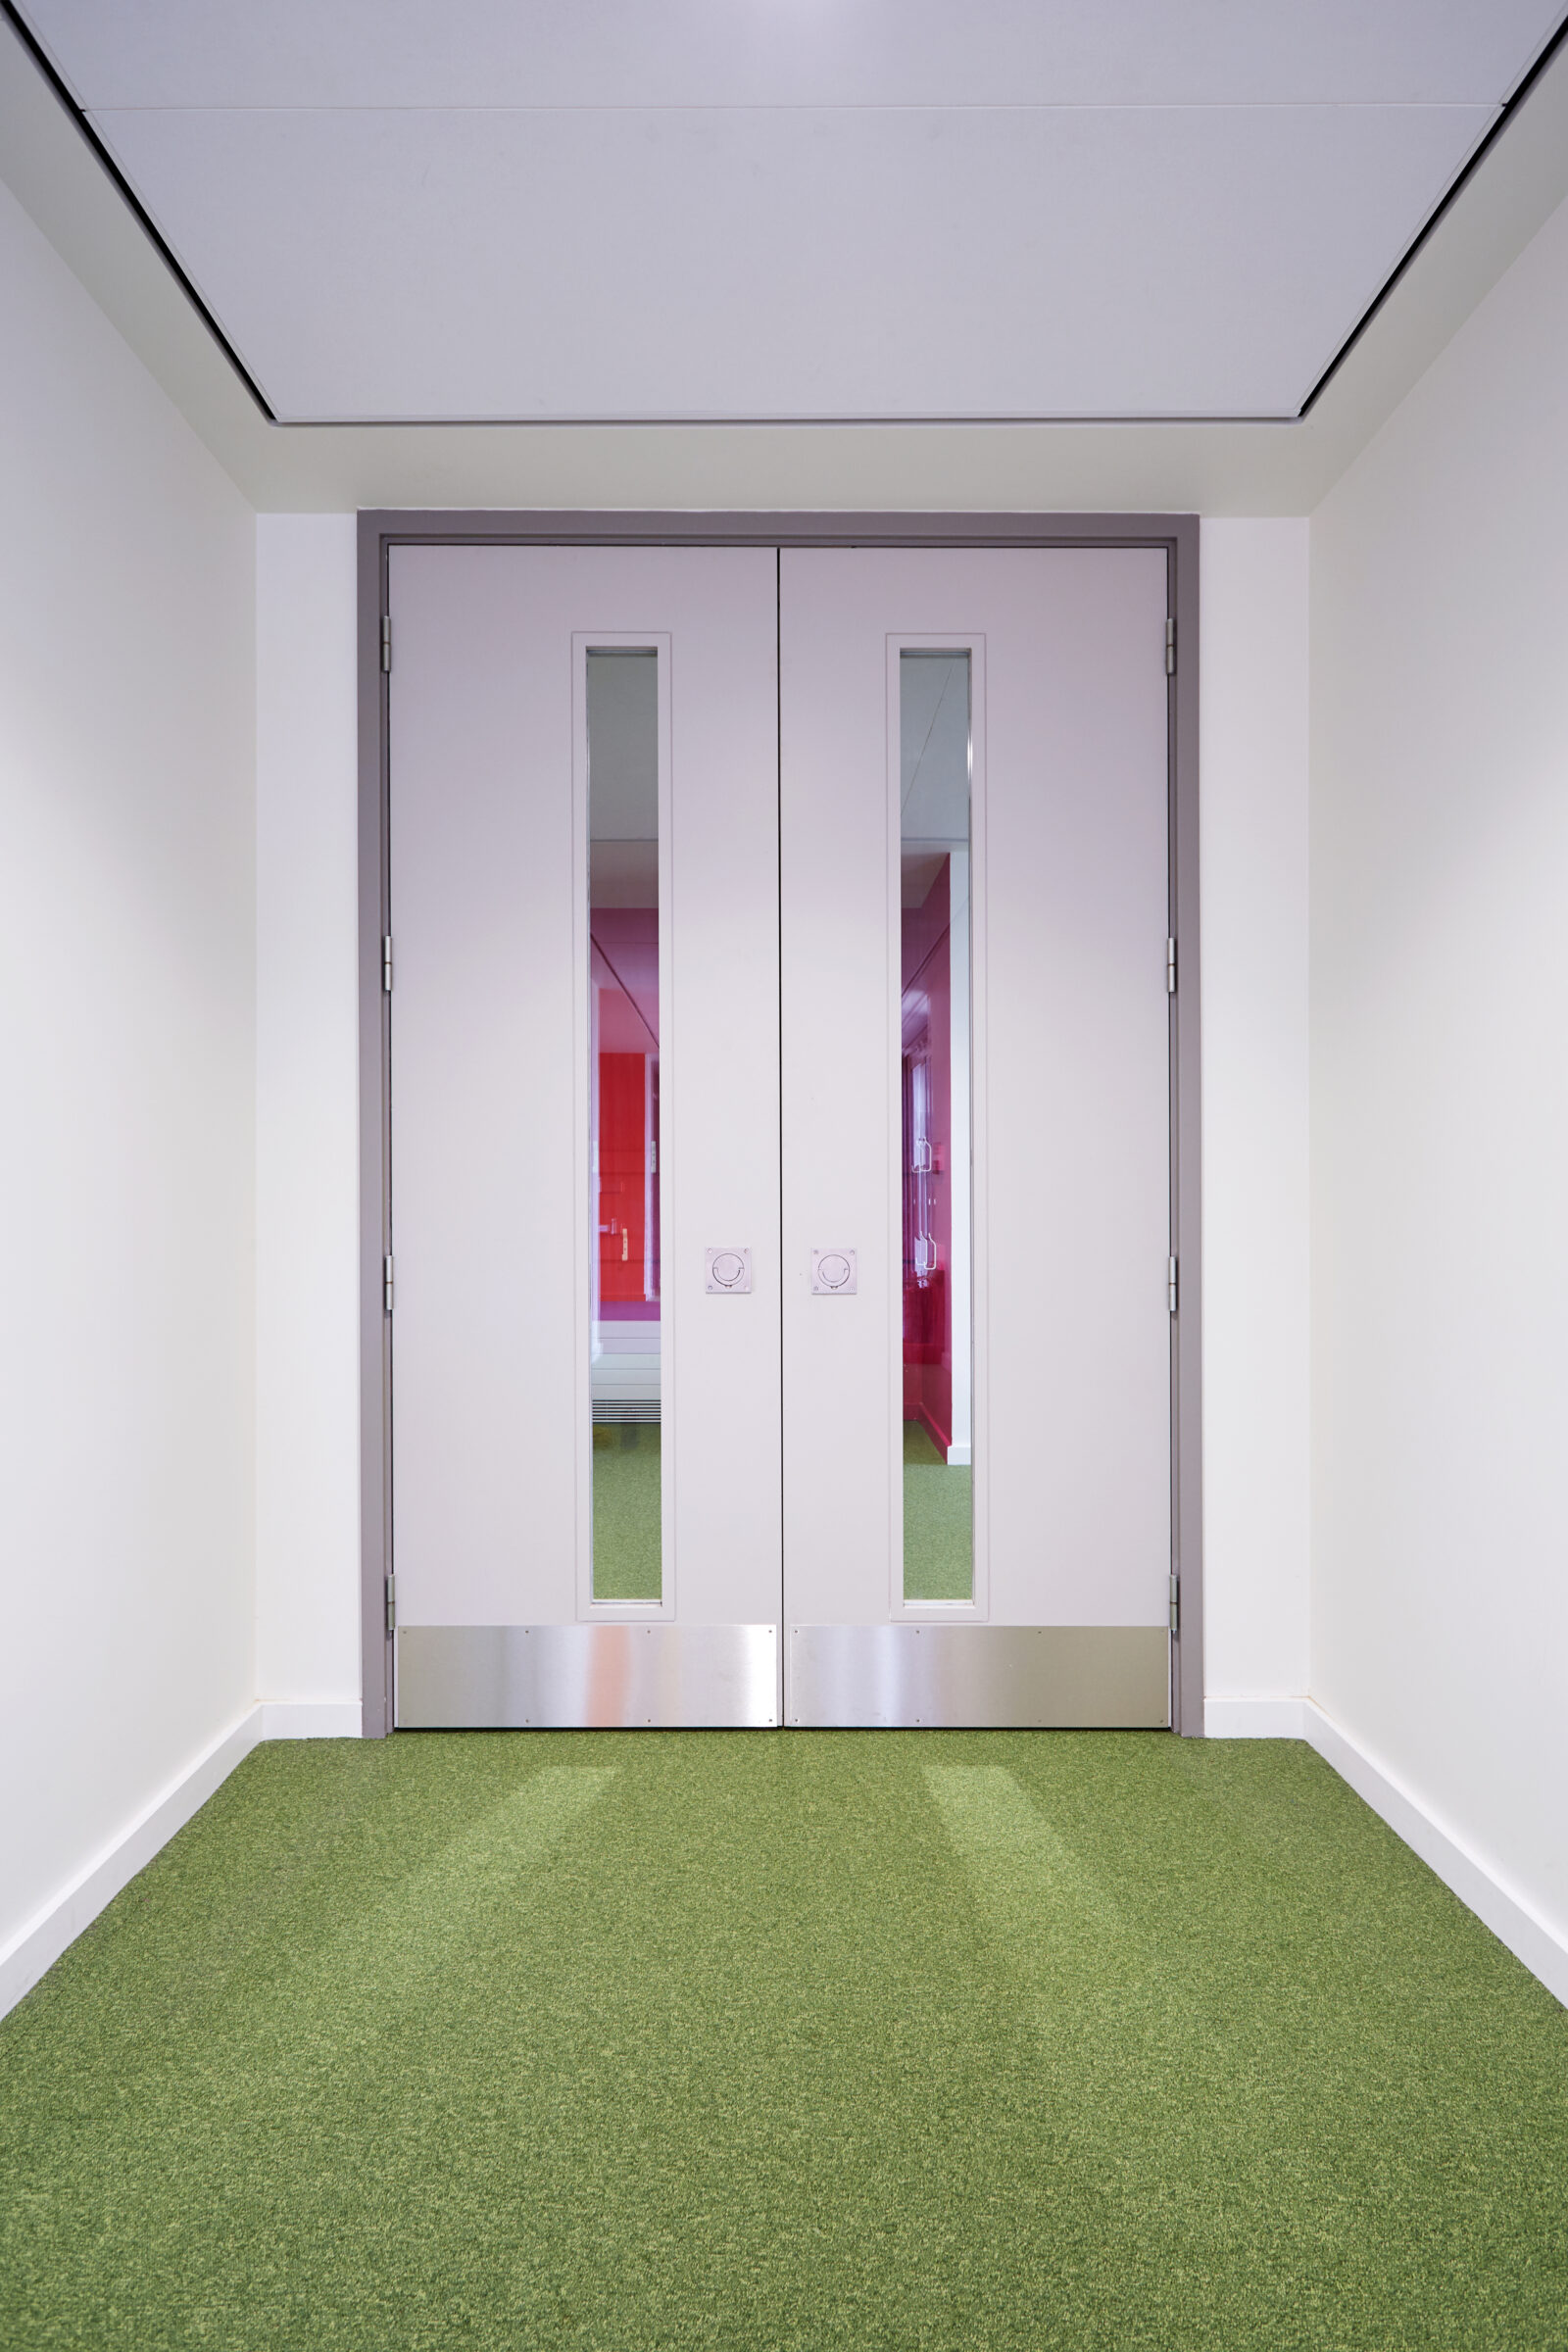 Fire Doors as Part of a Fire Safety Compliant Business